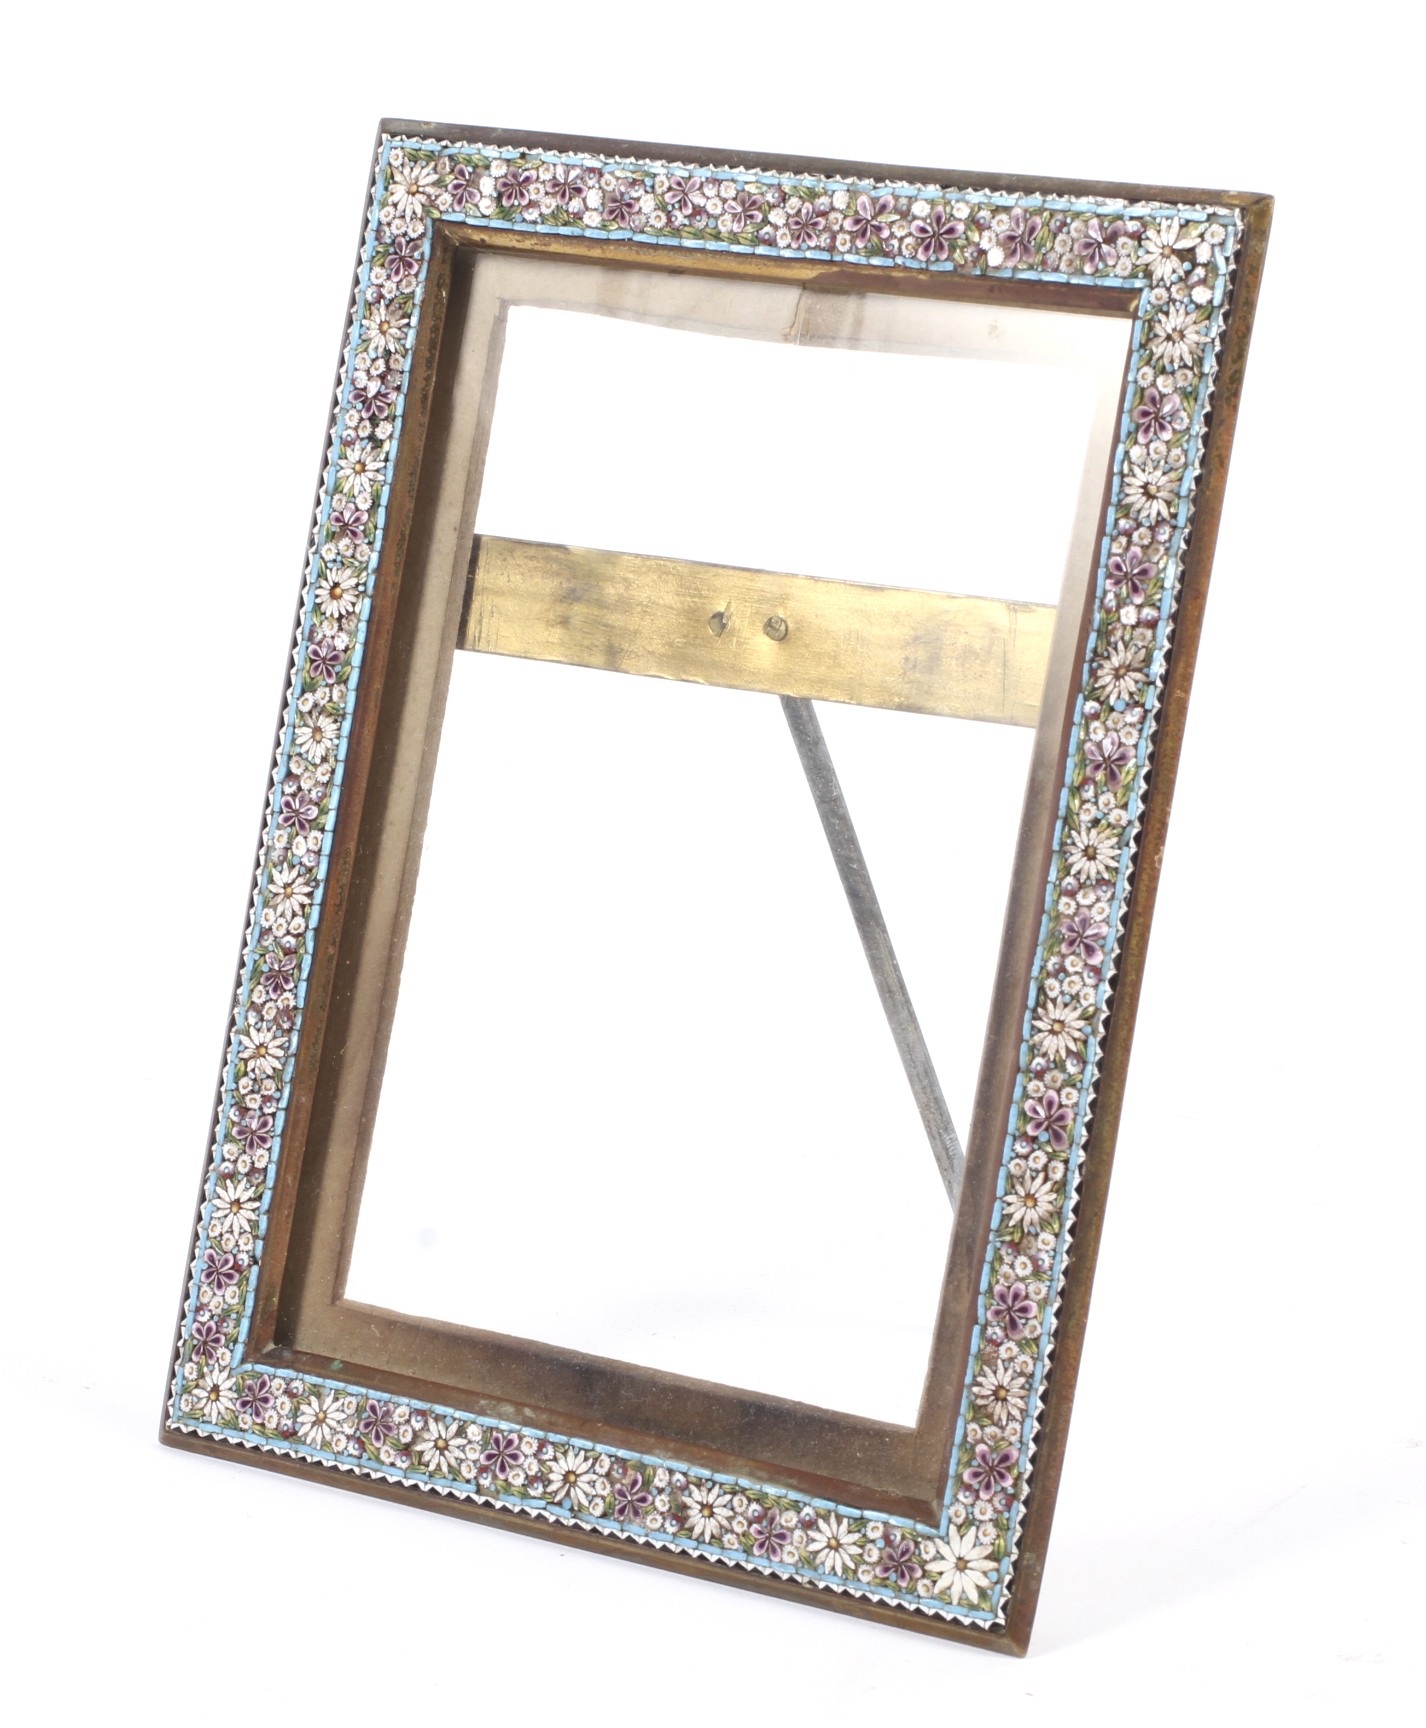 A fine brass and micro-mosaic picture frame.